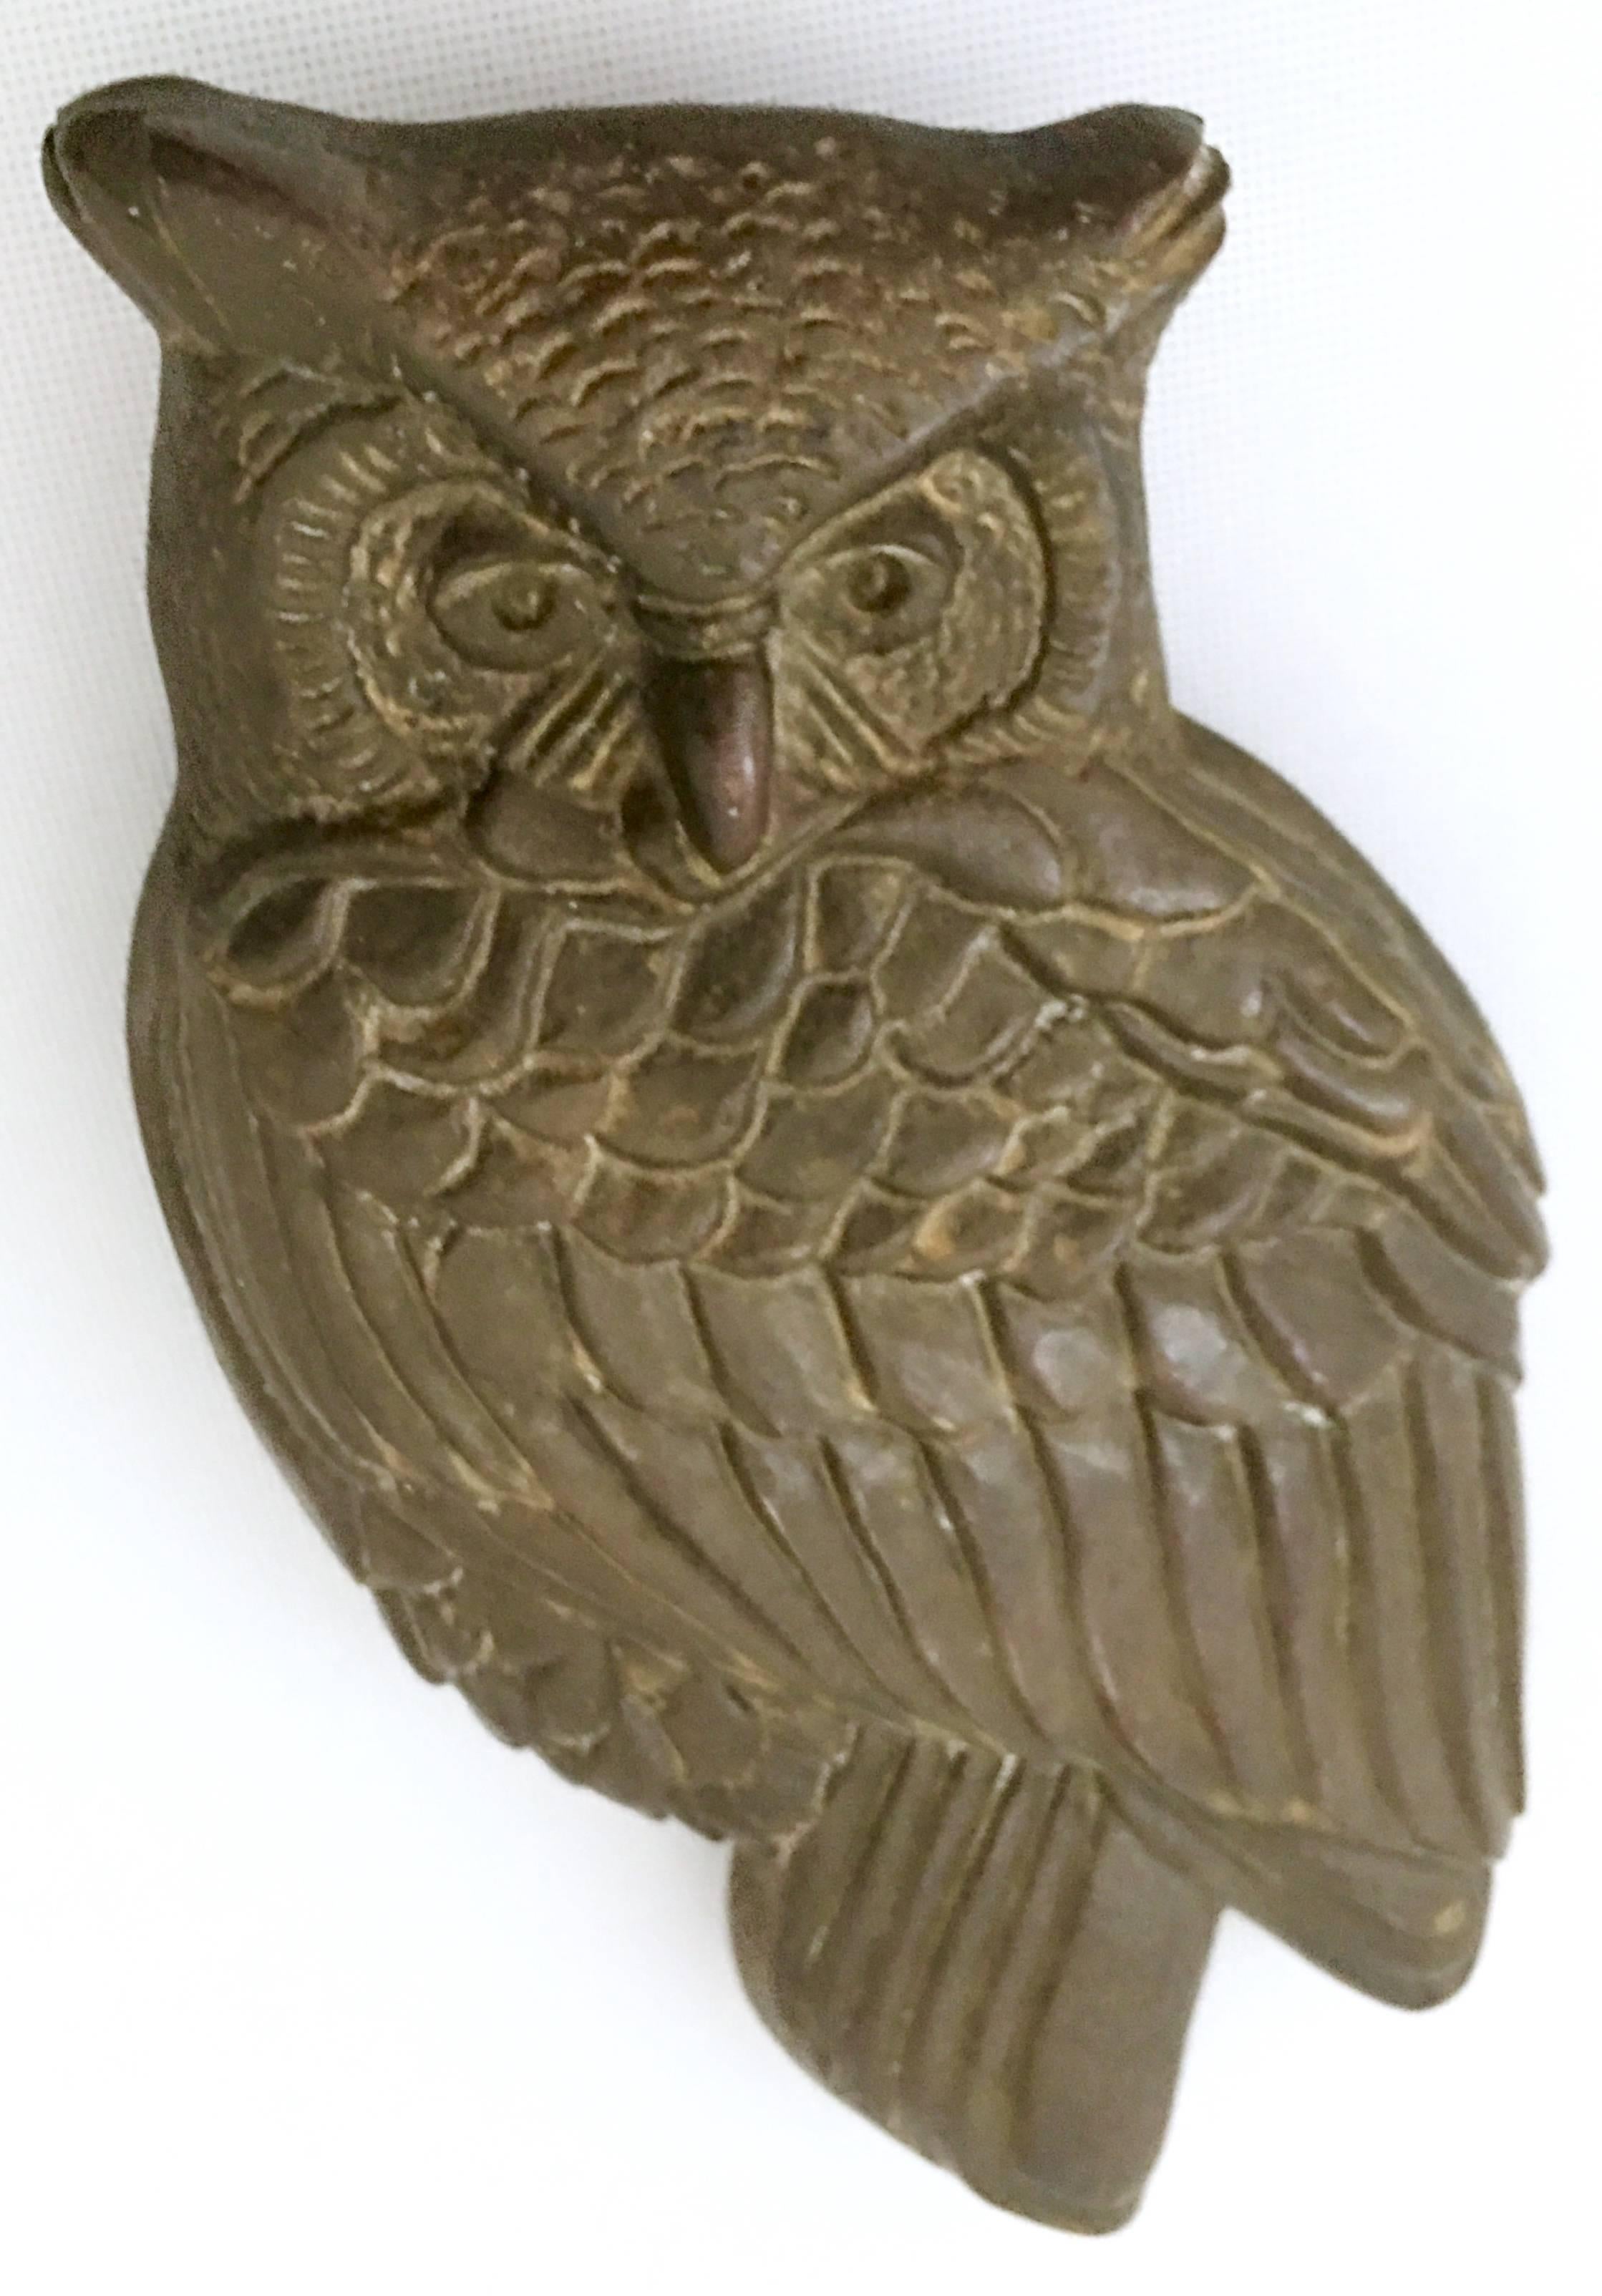 Vintage large solid brass owl door knocker. The brass plate mount has two pre-drilled holes for installation purposes.